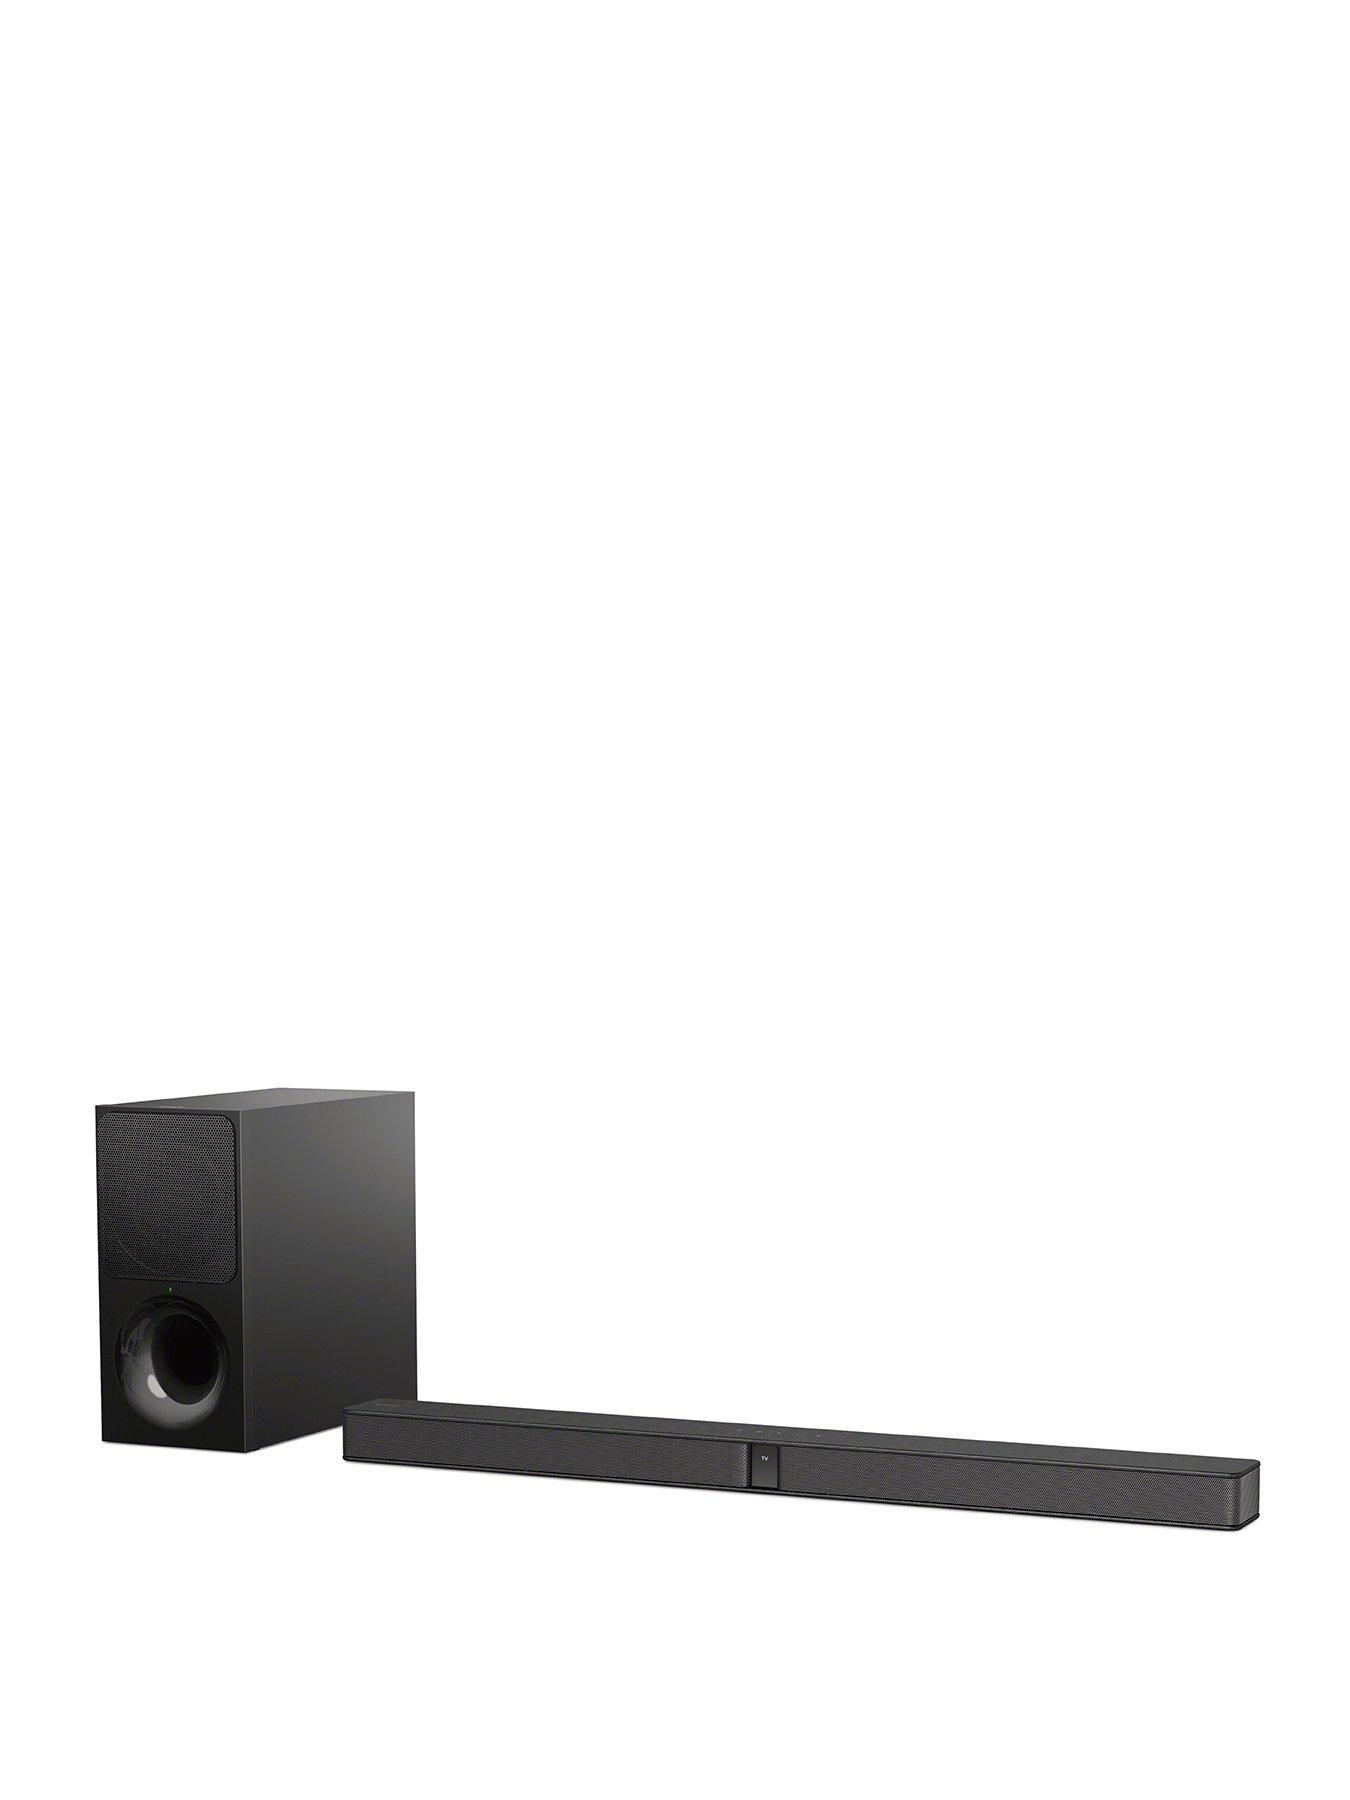 Sony Ht-Ct290 300W Soundbar With Bluetooth, Hdmi And Wireless Subwoofer - Black Review thumbnail